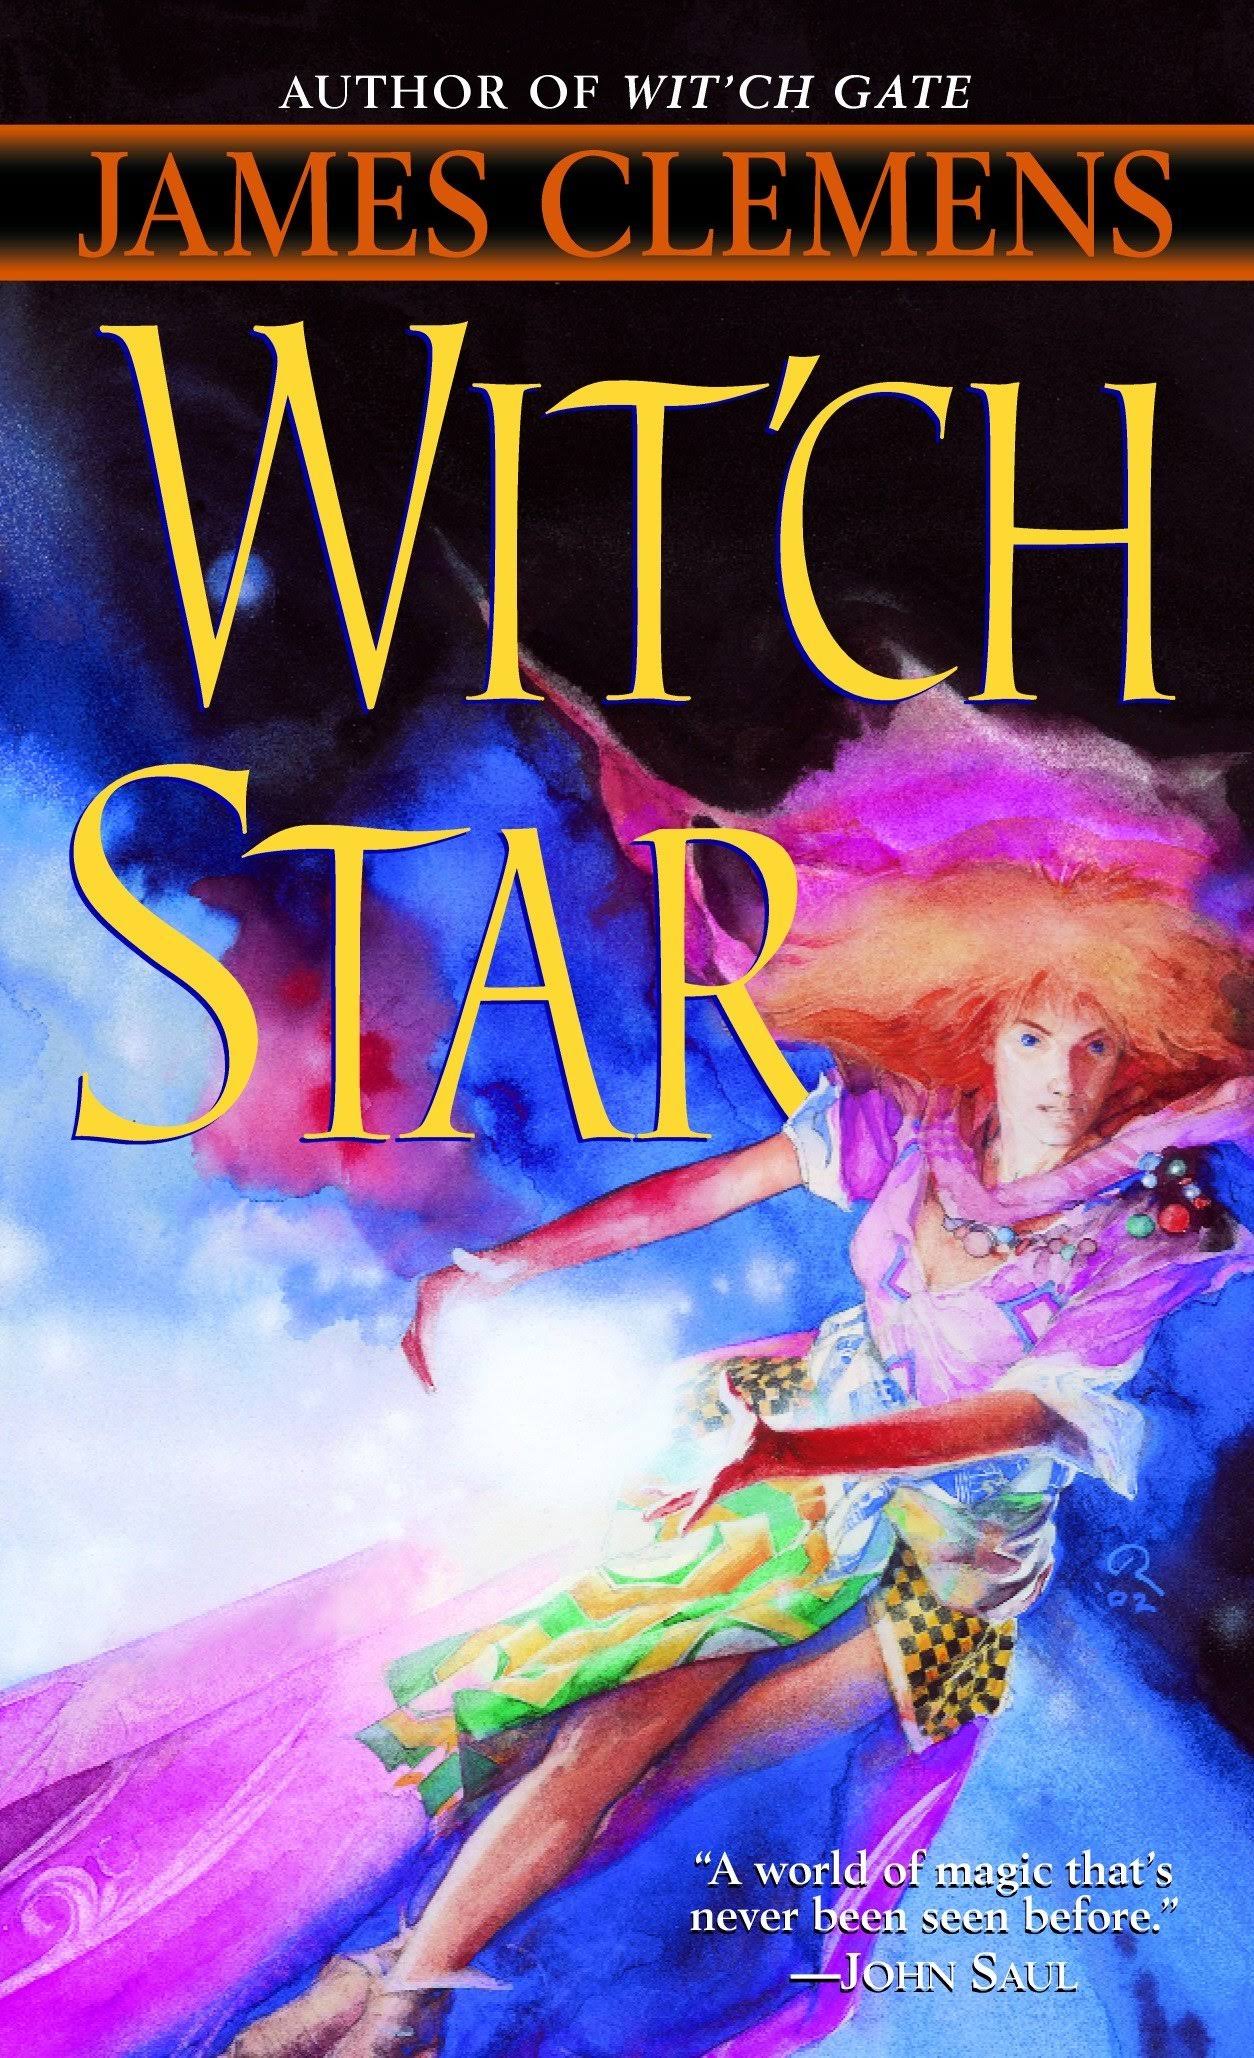 Wit'ch Star [Book]